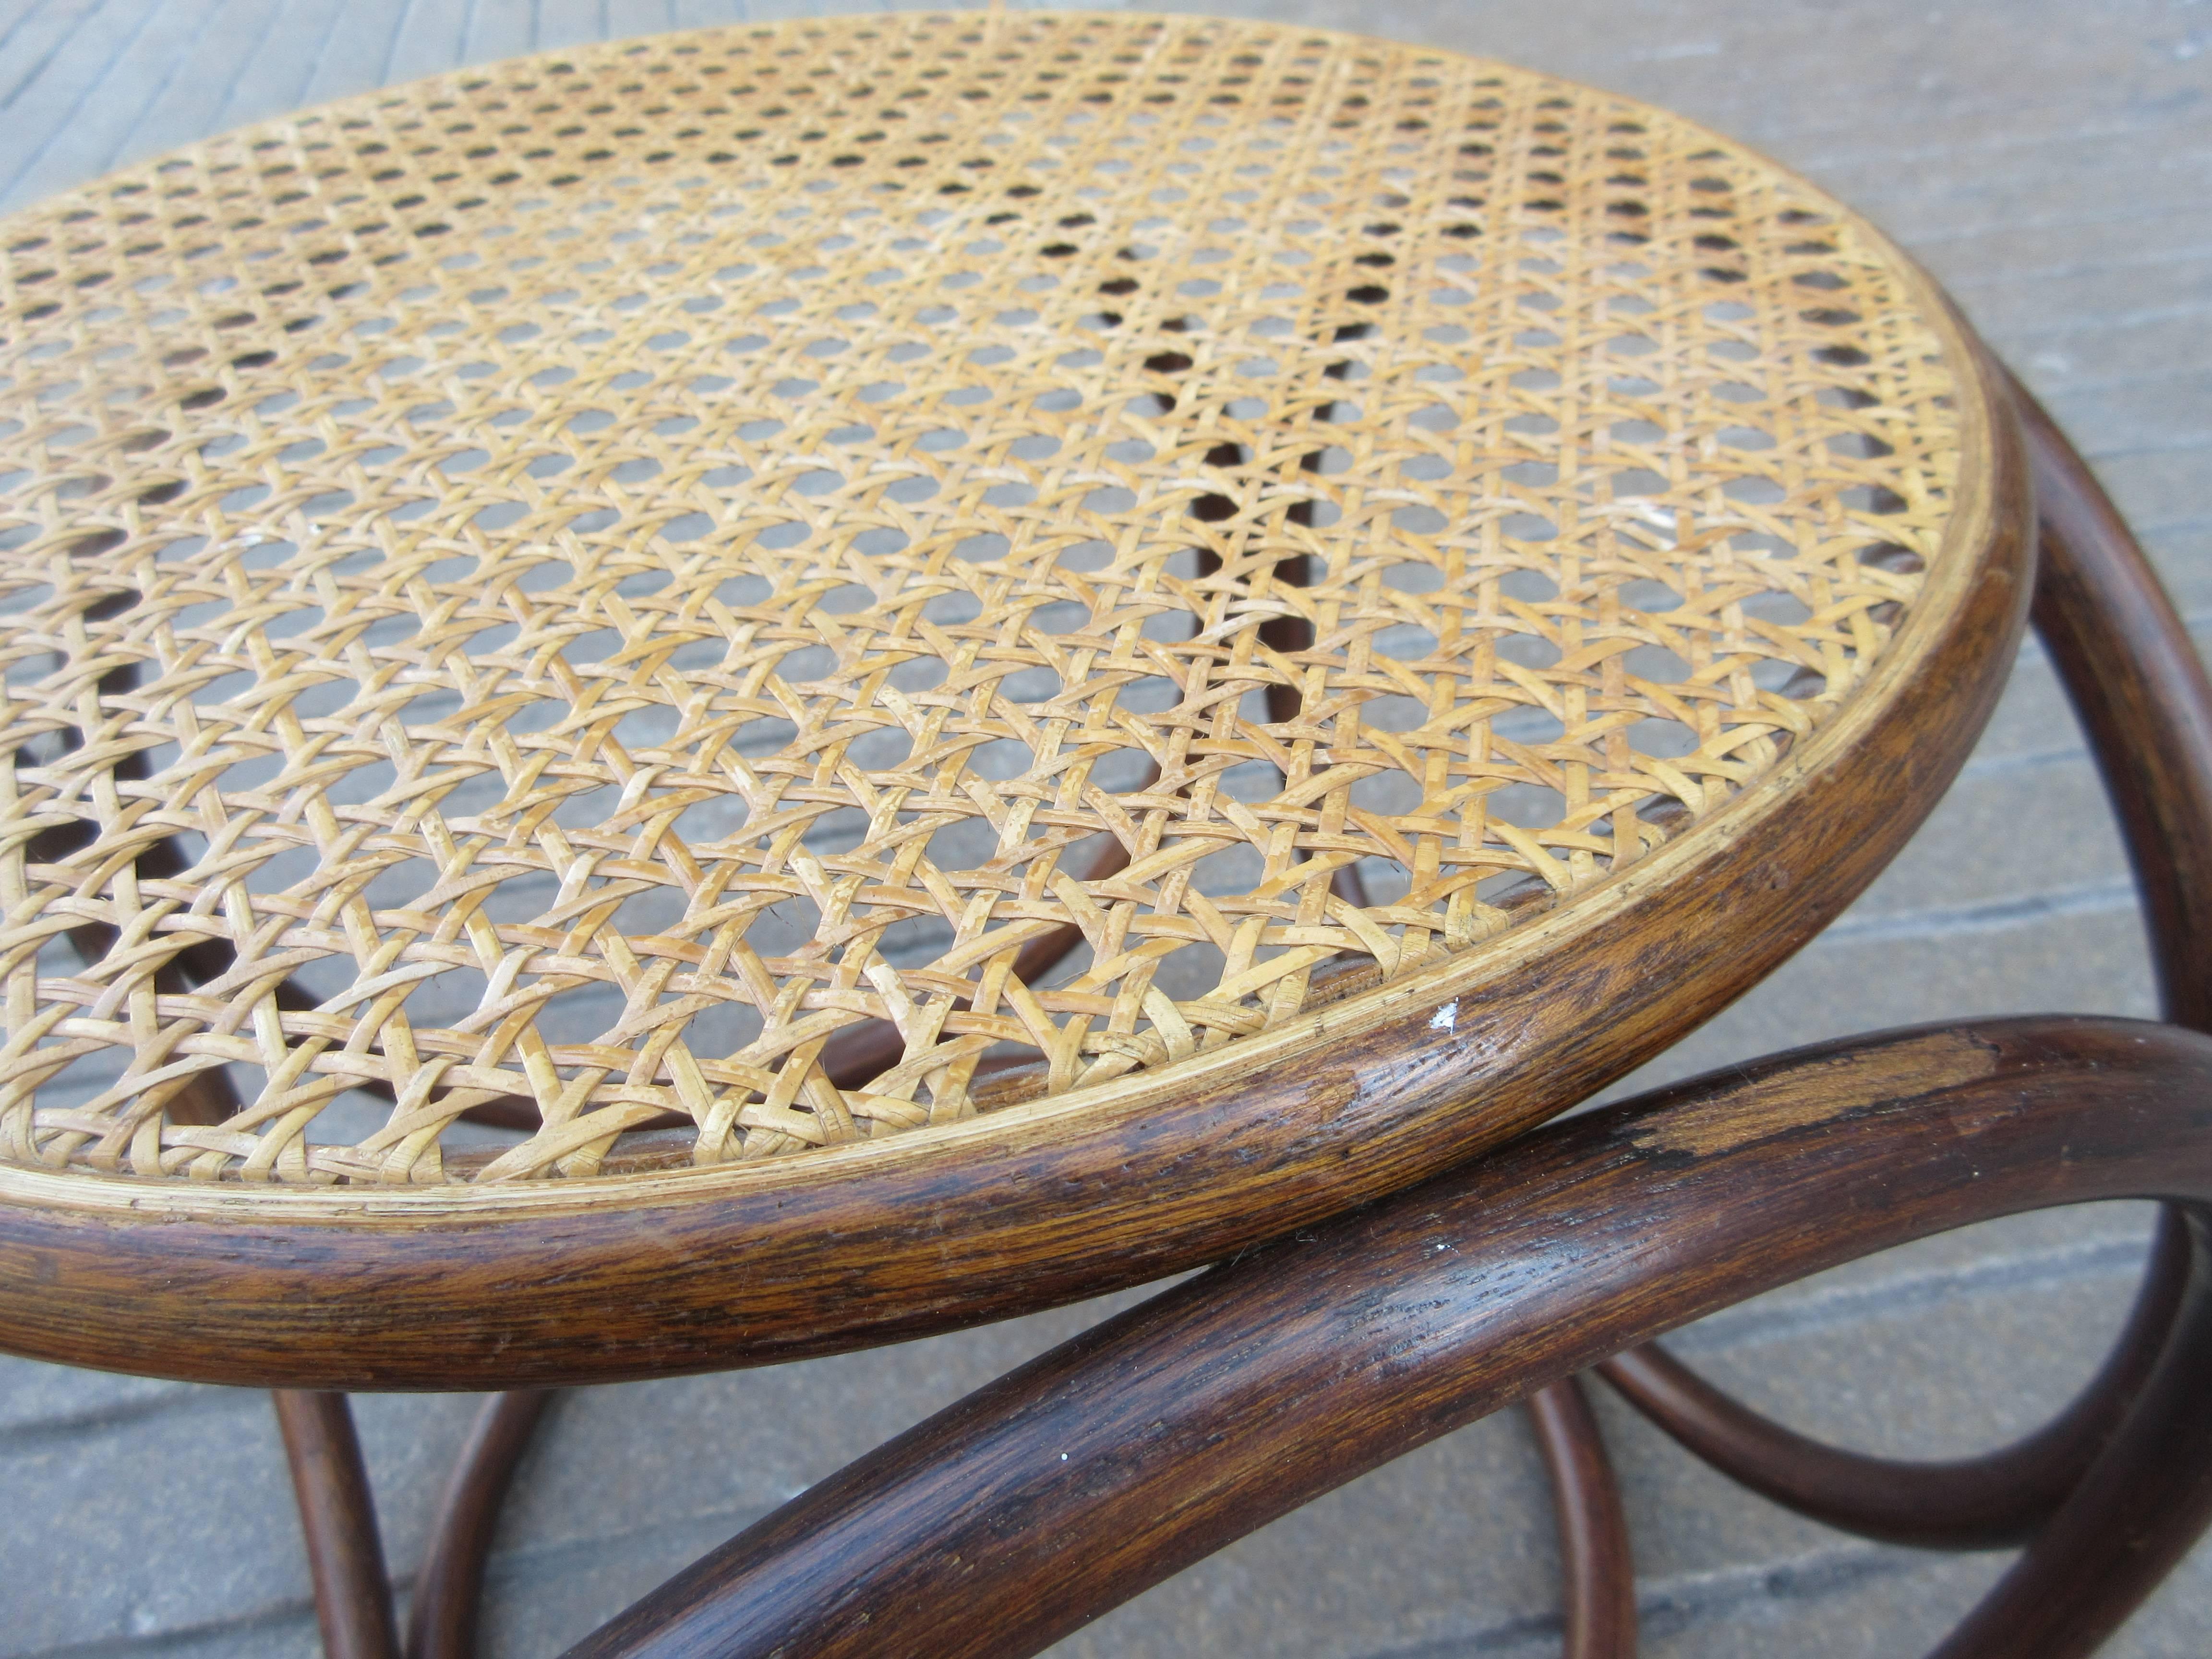 Classic early 20th century design by Thonet. Six bentwood rings make up the construction of this stool or ottoman. This stool's production date is probably 1970s.